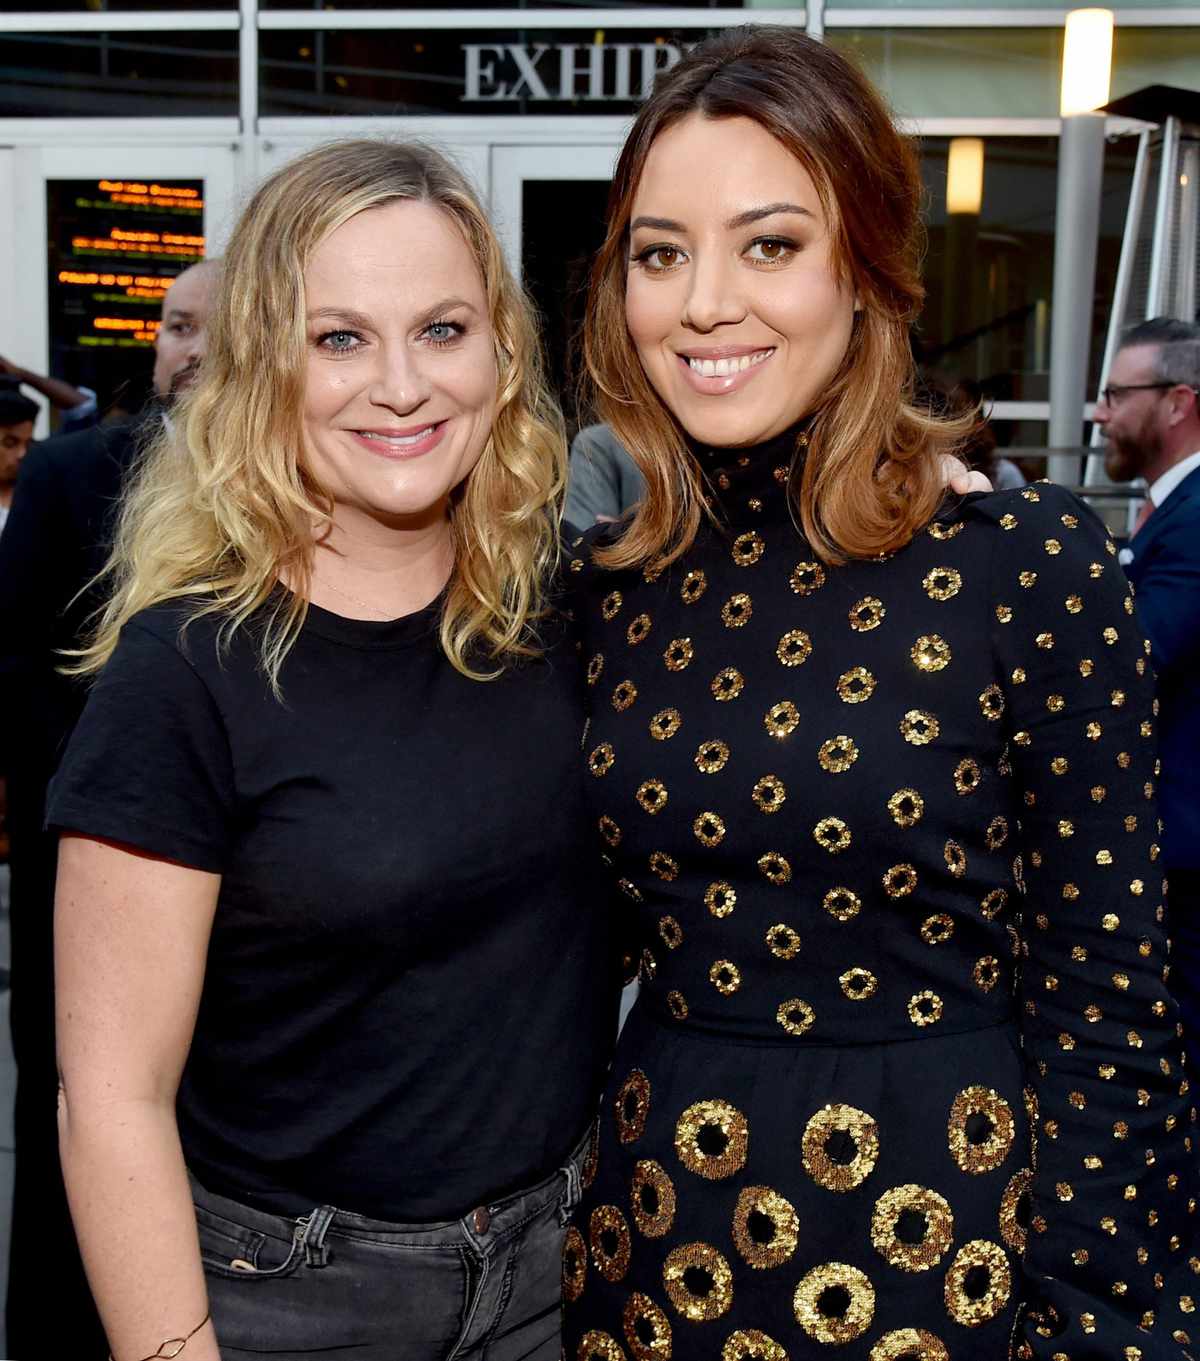 Actors Amy Poehler (L) and Aubrey Plaza at the premiere of Neon's "Ingrid Goes West" at ArcLight Hollywood on July 27, 2017 in Hollywood, California.  (Photo by Alberto E. Rodriguez/Getty Images)